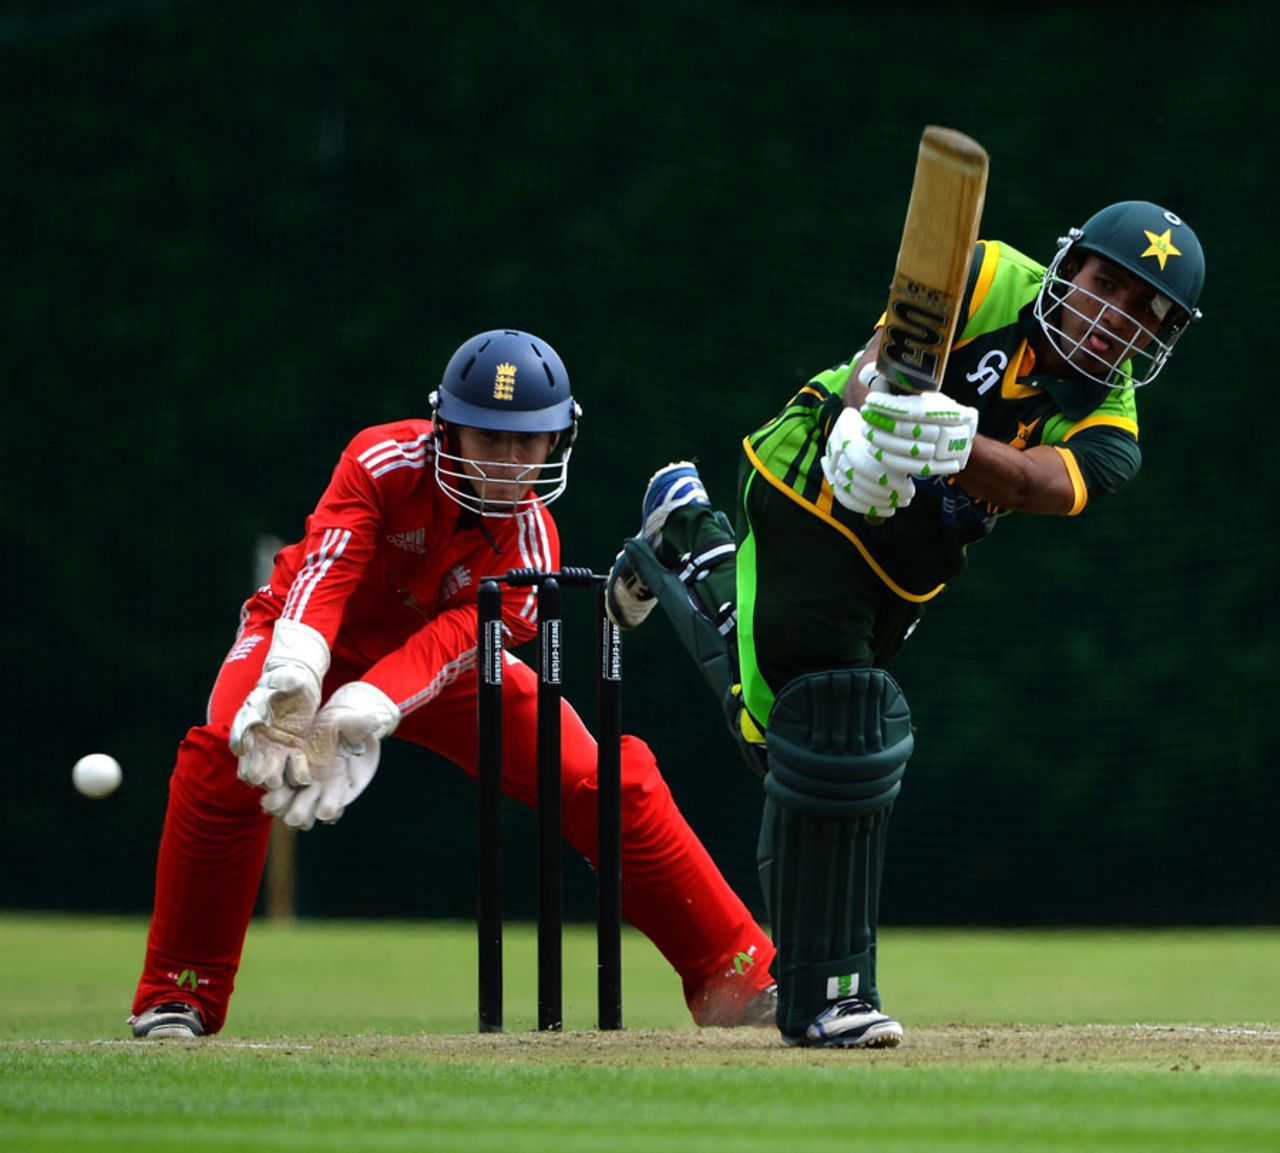 Sami Aslam made 60 at the top of the order, England Under-19s v Pakistan Under-19s, Under-19s Tri-Nation Tournament, Sleaford, August, 6, 2013